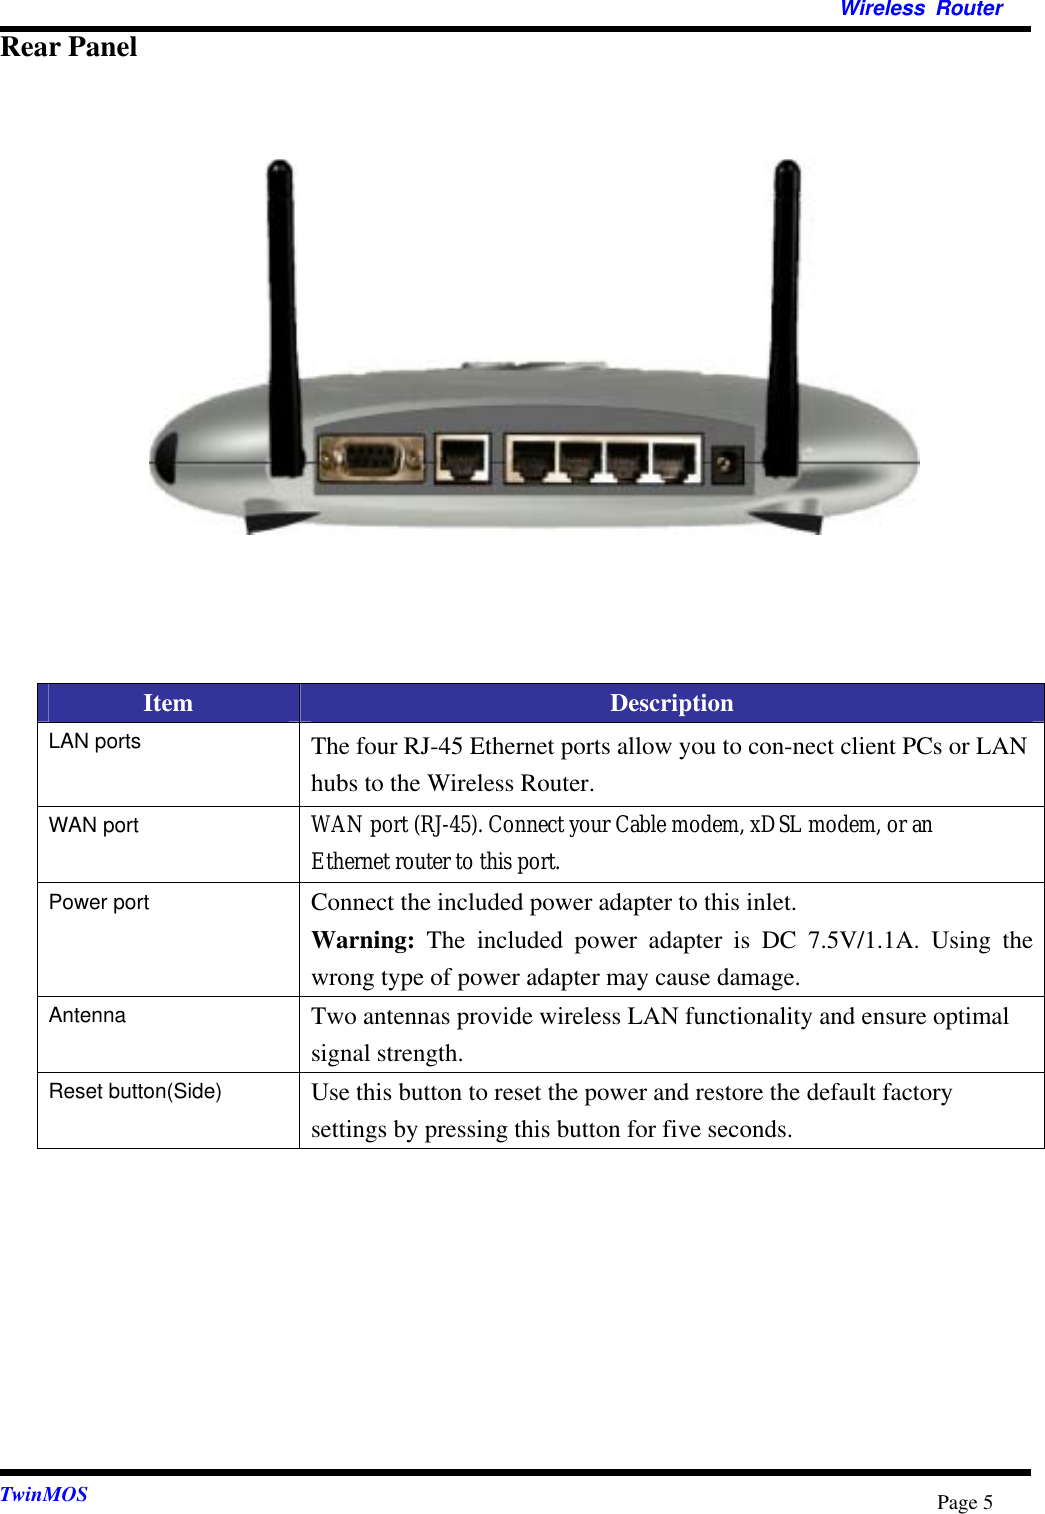   Wireless Router  TwinMOS  Page 5Rear Panel              Item  Description LAN ports  The four RJ-45 Ethernet ports allow you to con-nect client PCs or LAN hubs to the Wireless Router.   WAN port  WAN port (RJ-45). Connect your Cable modem, xDSL modem, or an Ethernet router to this port. Power port  Connect the included power adapter to this inlet. Warning:  The included power adapter is DC 7.5V/1.1A. Using the wrong type of power adapter may cause damage. Antenna  Two antennas provide wireless LAN functionality and ensure optimal signal strength. Reset button(Side)  Use this button to reset the power and restore the default factory settings by pressing this button for five seconds.         